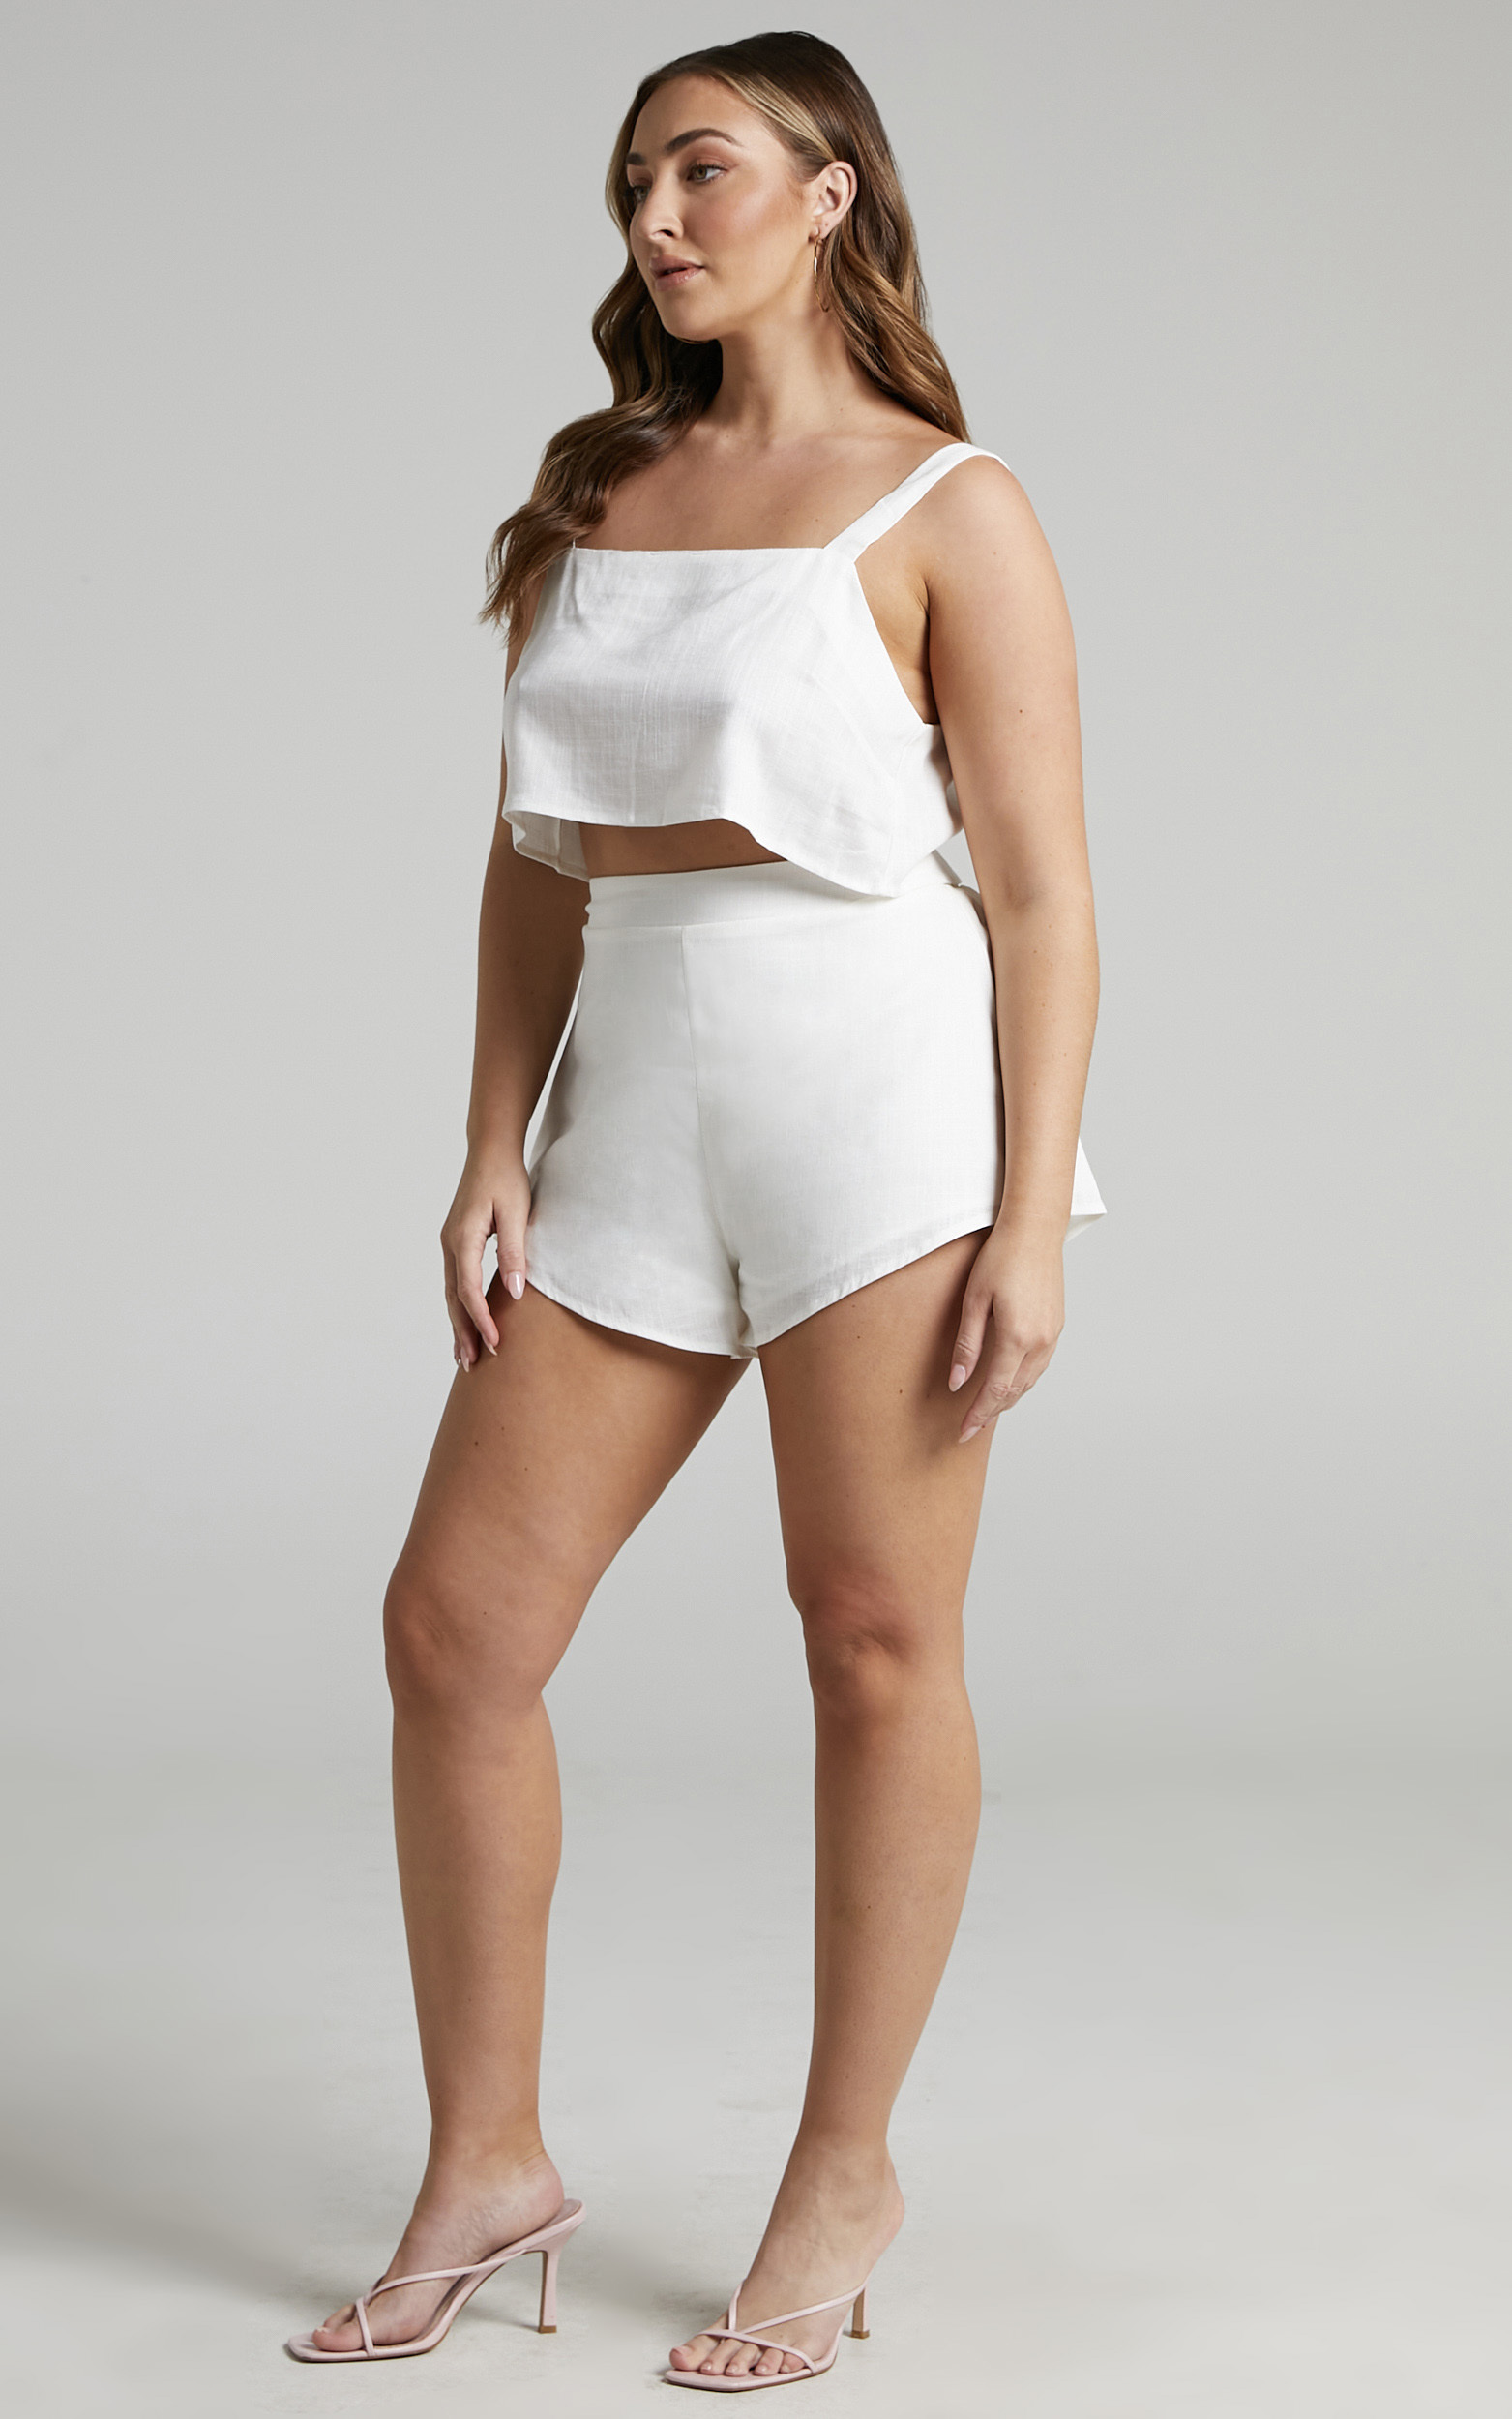 Zanrie Square Neck Crop Top and High Waist Mini Flare Shorts in White Linen Look - 14, WHT5, hi-res image number null